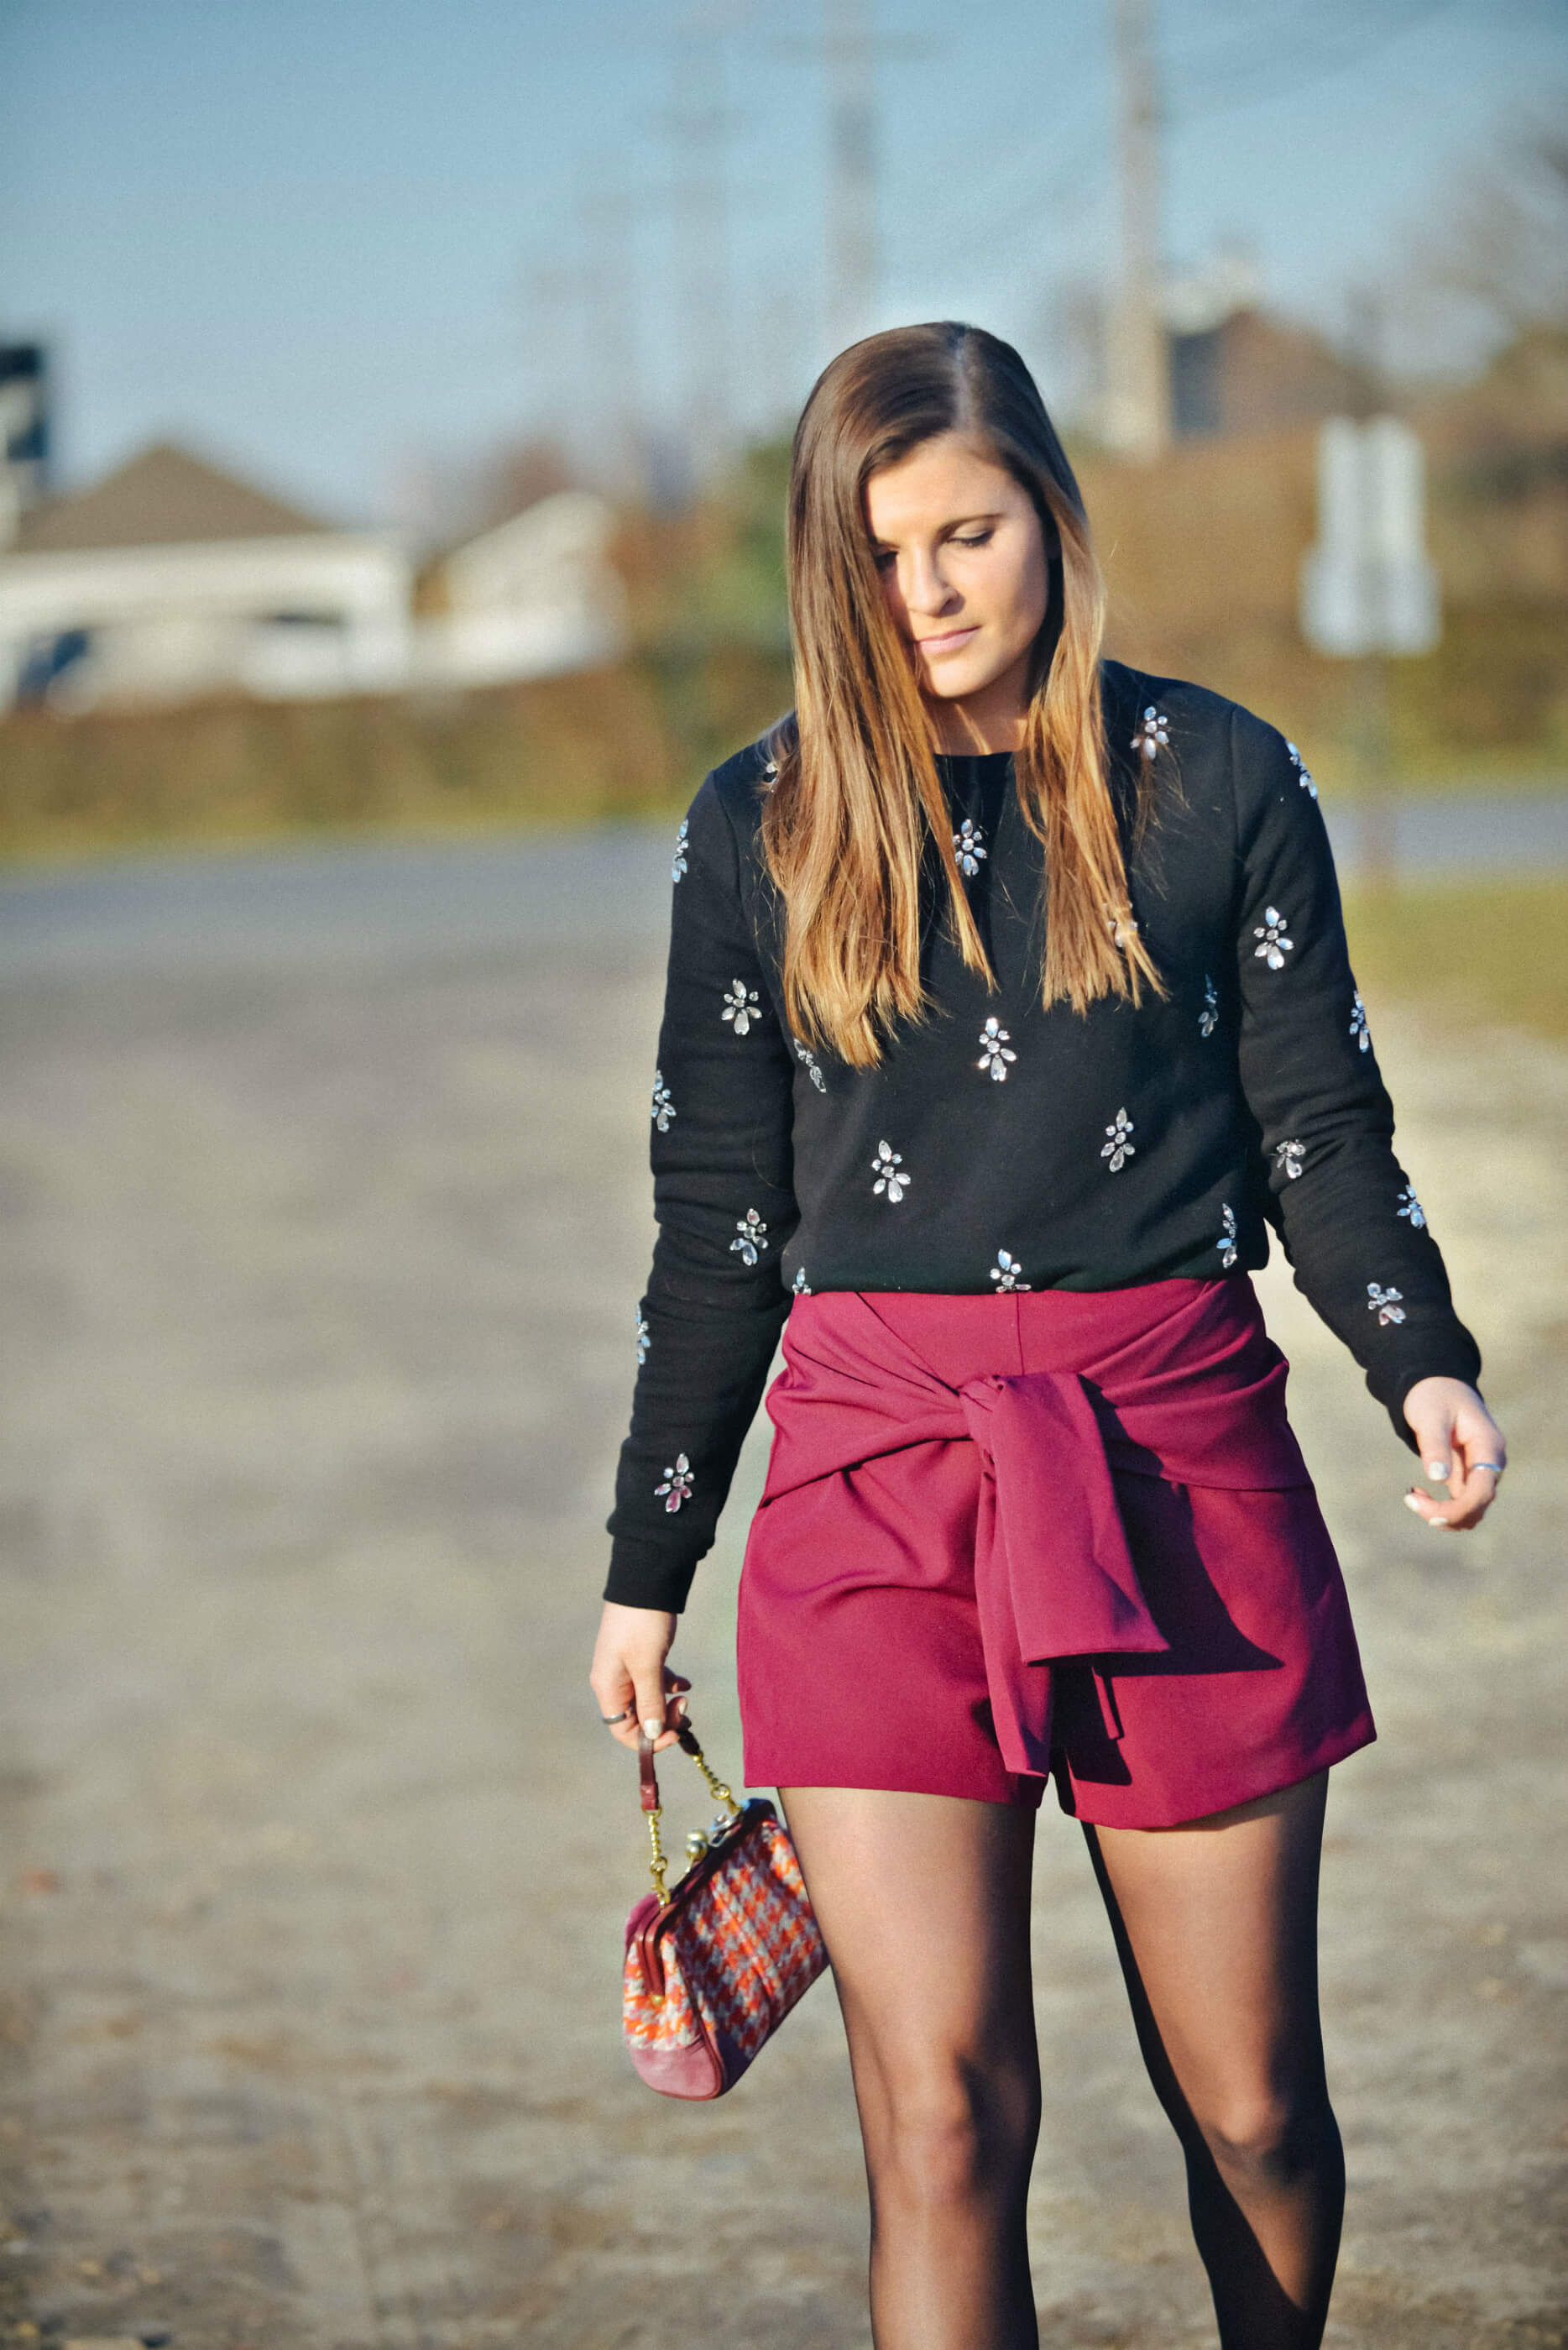 H&M Embellished Sweater, ASOS Plum Burgundy Shorts, New Year's Eve Outfit Idea, Tilden of To Be Bright